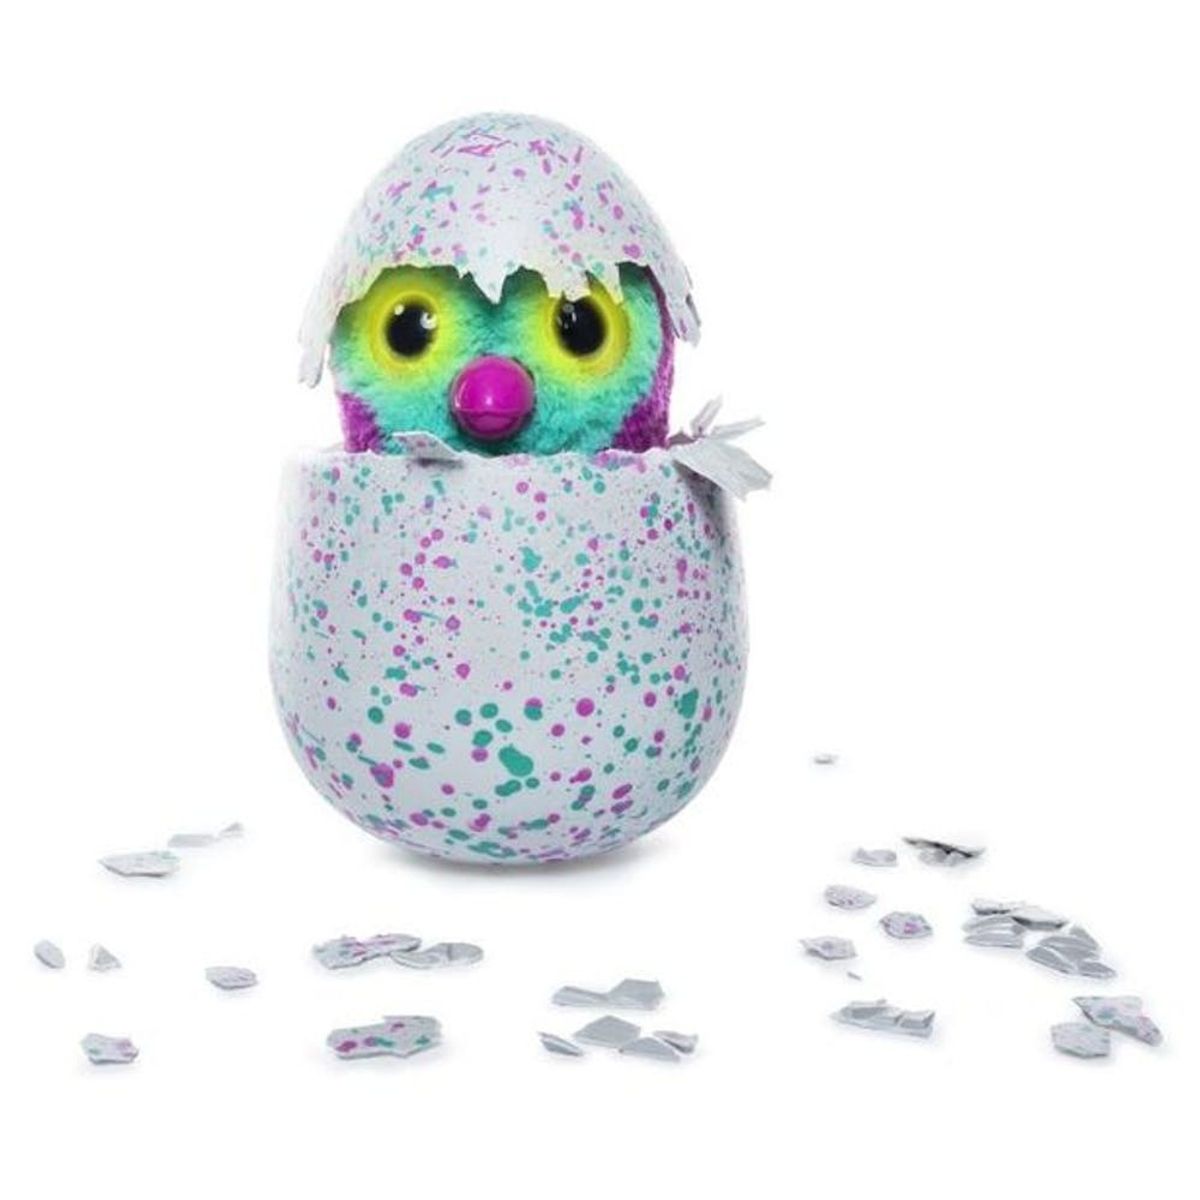 Some Hatchimals Are Saying Some Pretty NSFW Things